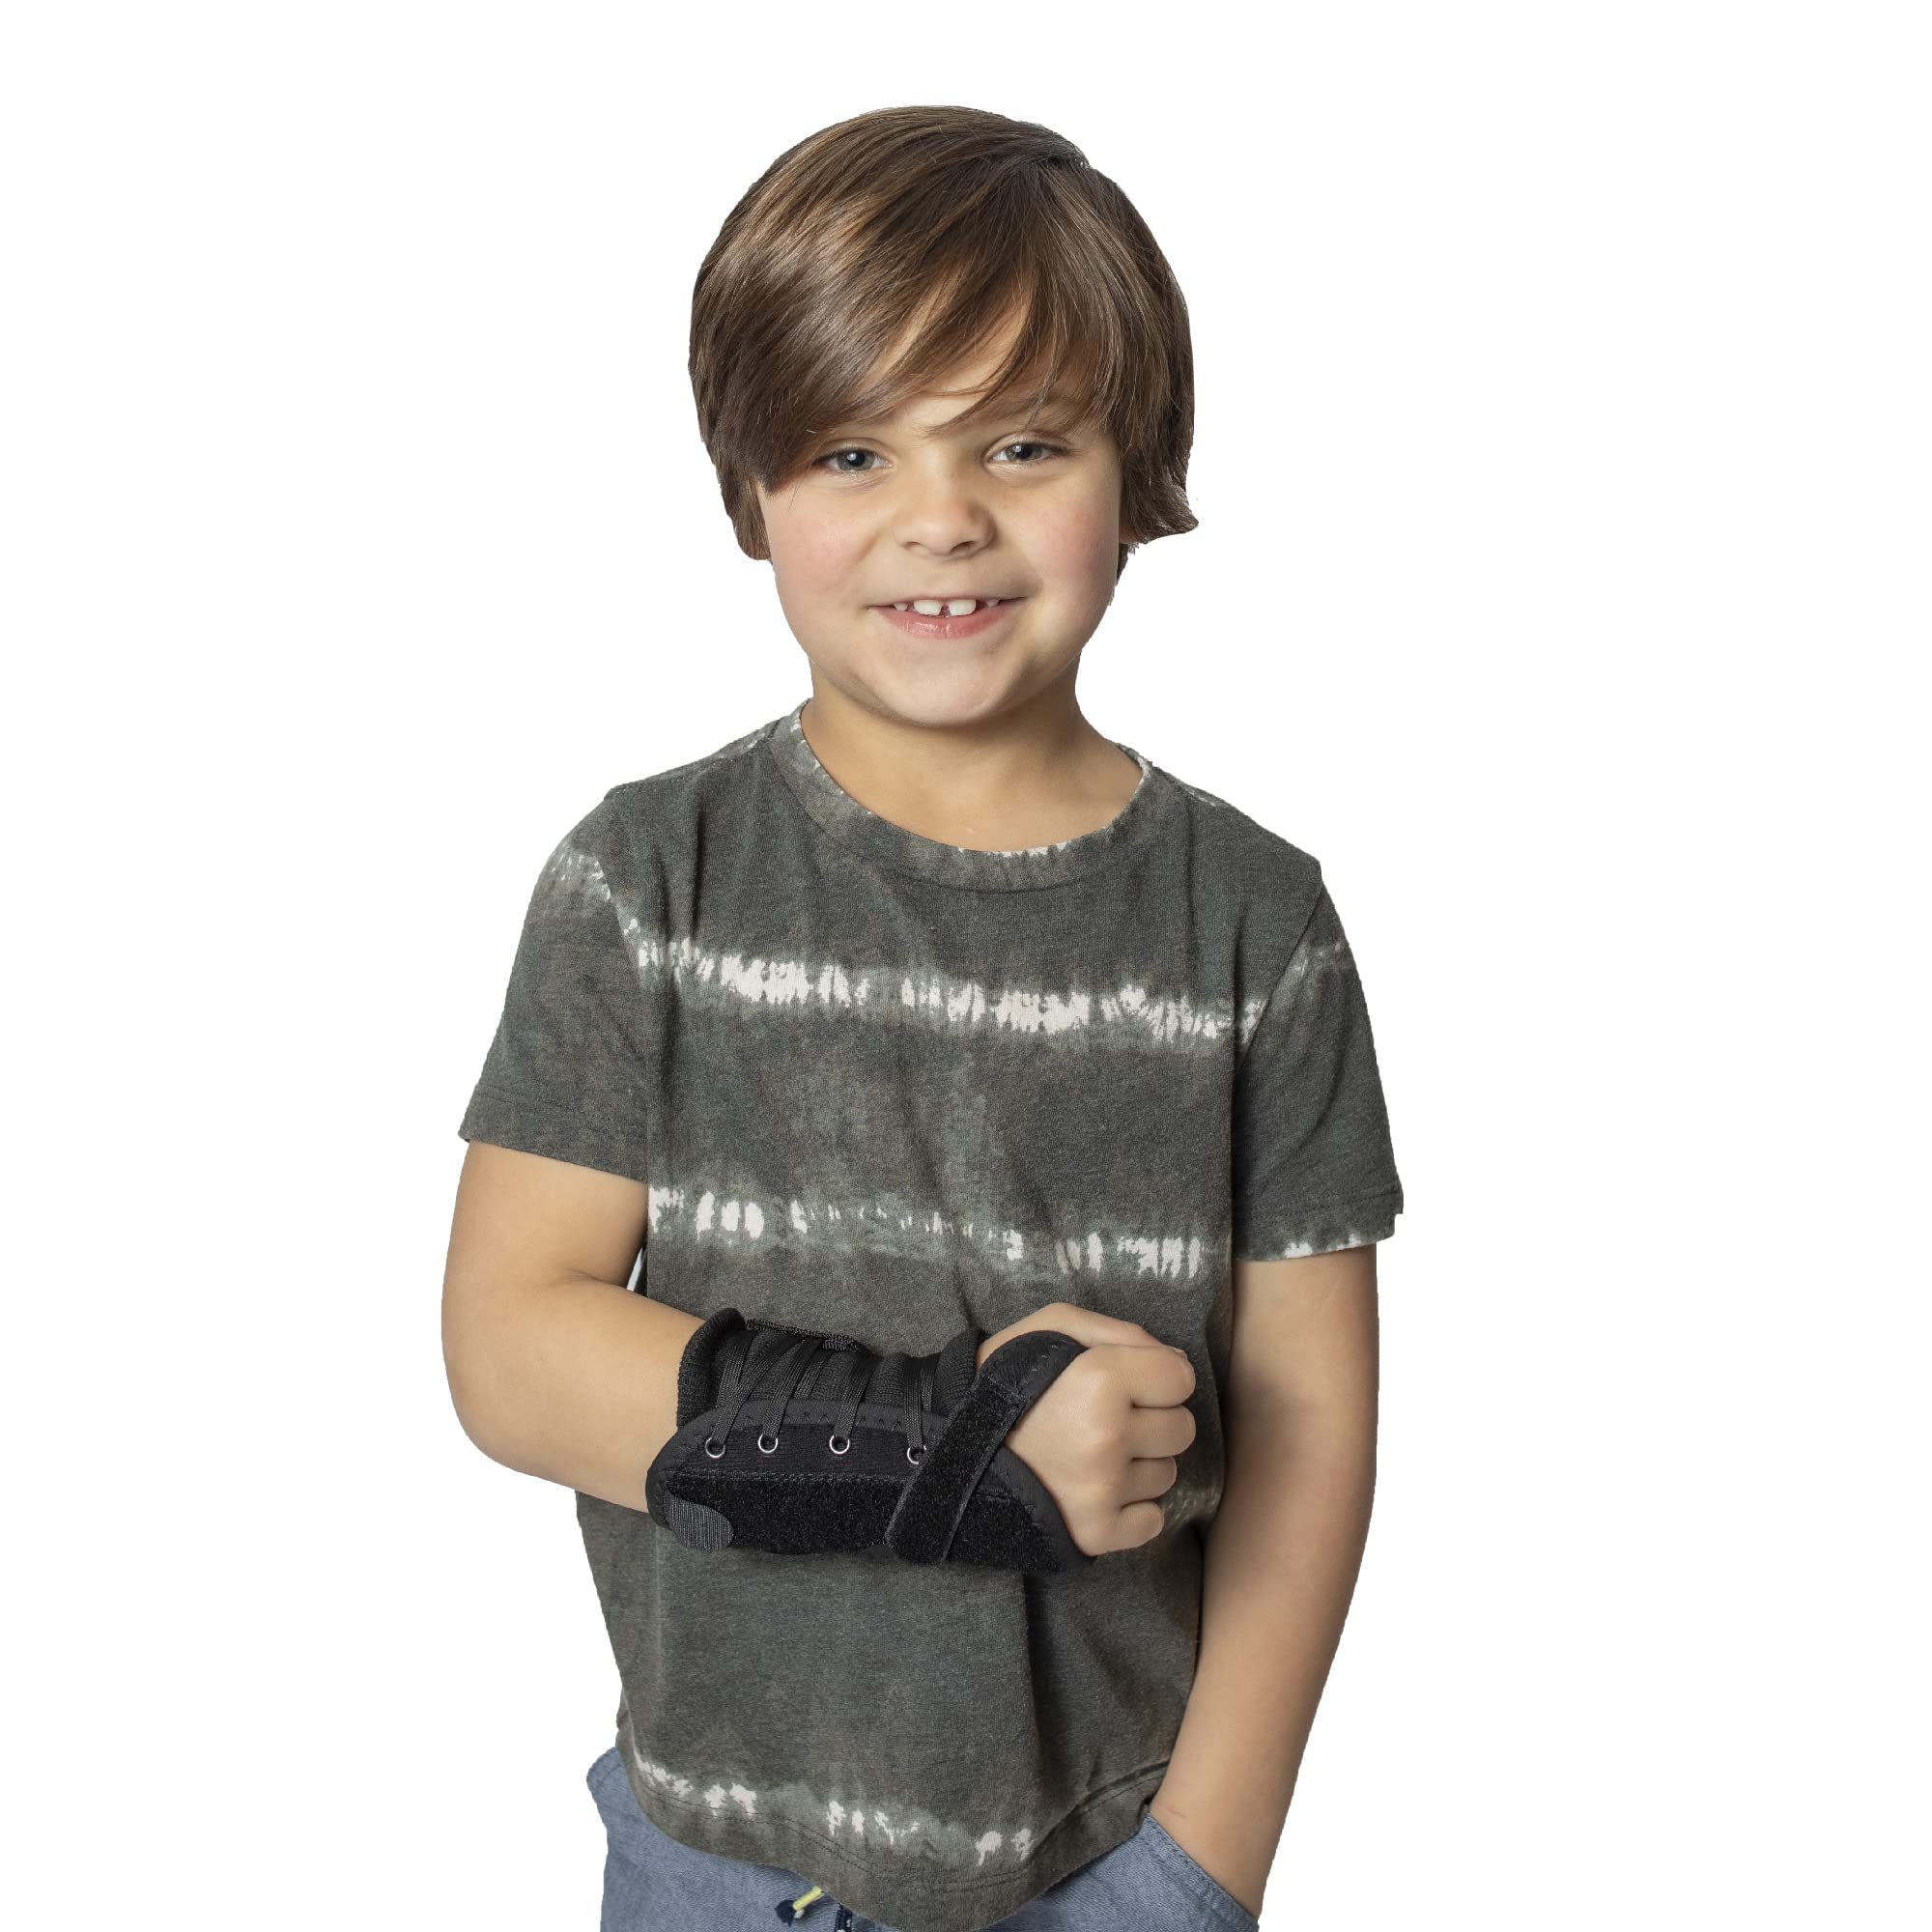 Brace Align Kid s Lace-Up Wrist Brace for Wrist Immobilization Sprains &  Strains Carpal Tunnel Syndrome & De Quervain s Syndrome - Pediatric Sizes  in Left or Right Wrist PDAC L3908 Left